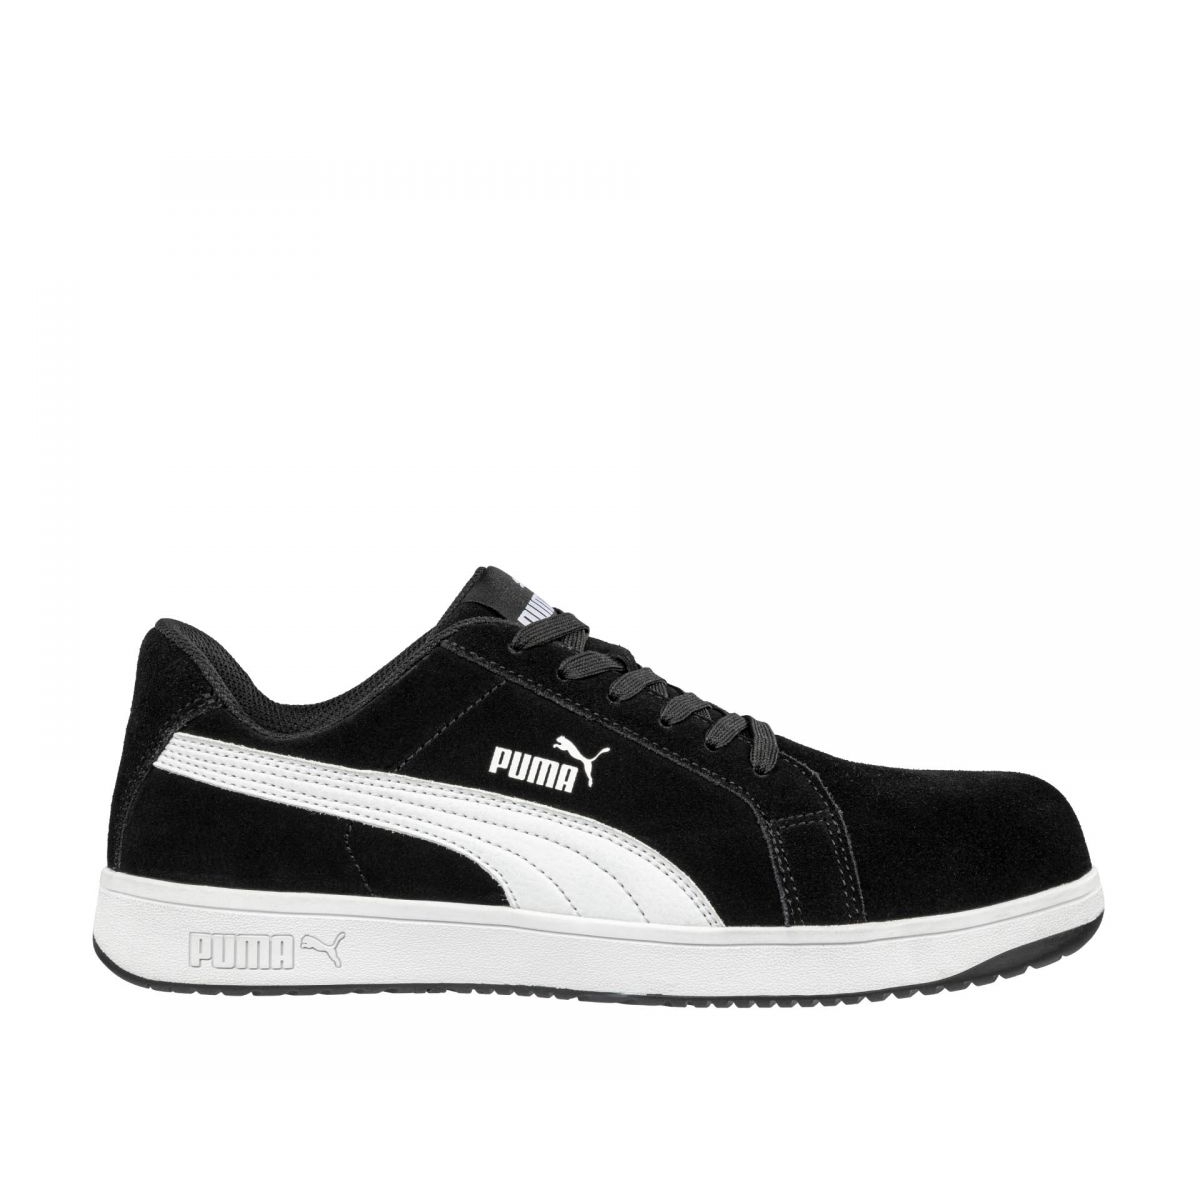 PUMA Safety Men's Iconic Low Composite Toe EH Work Shoes Black Suede - 640015 ONE SIZE BLACK - BLACK, 7